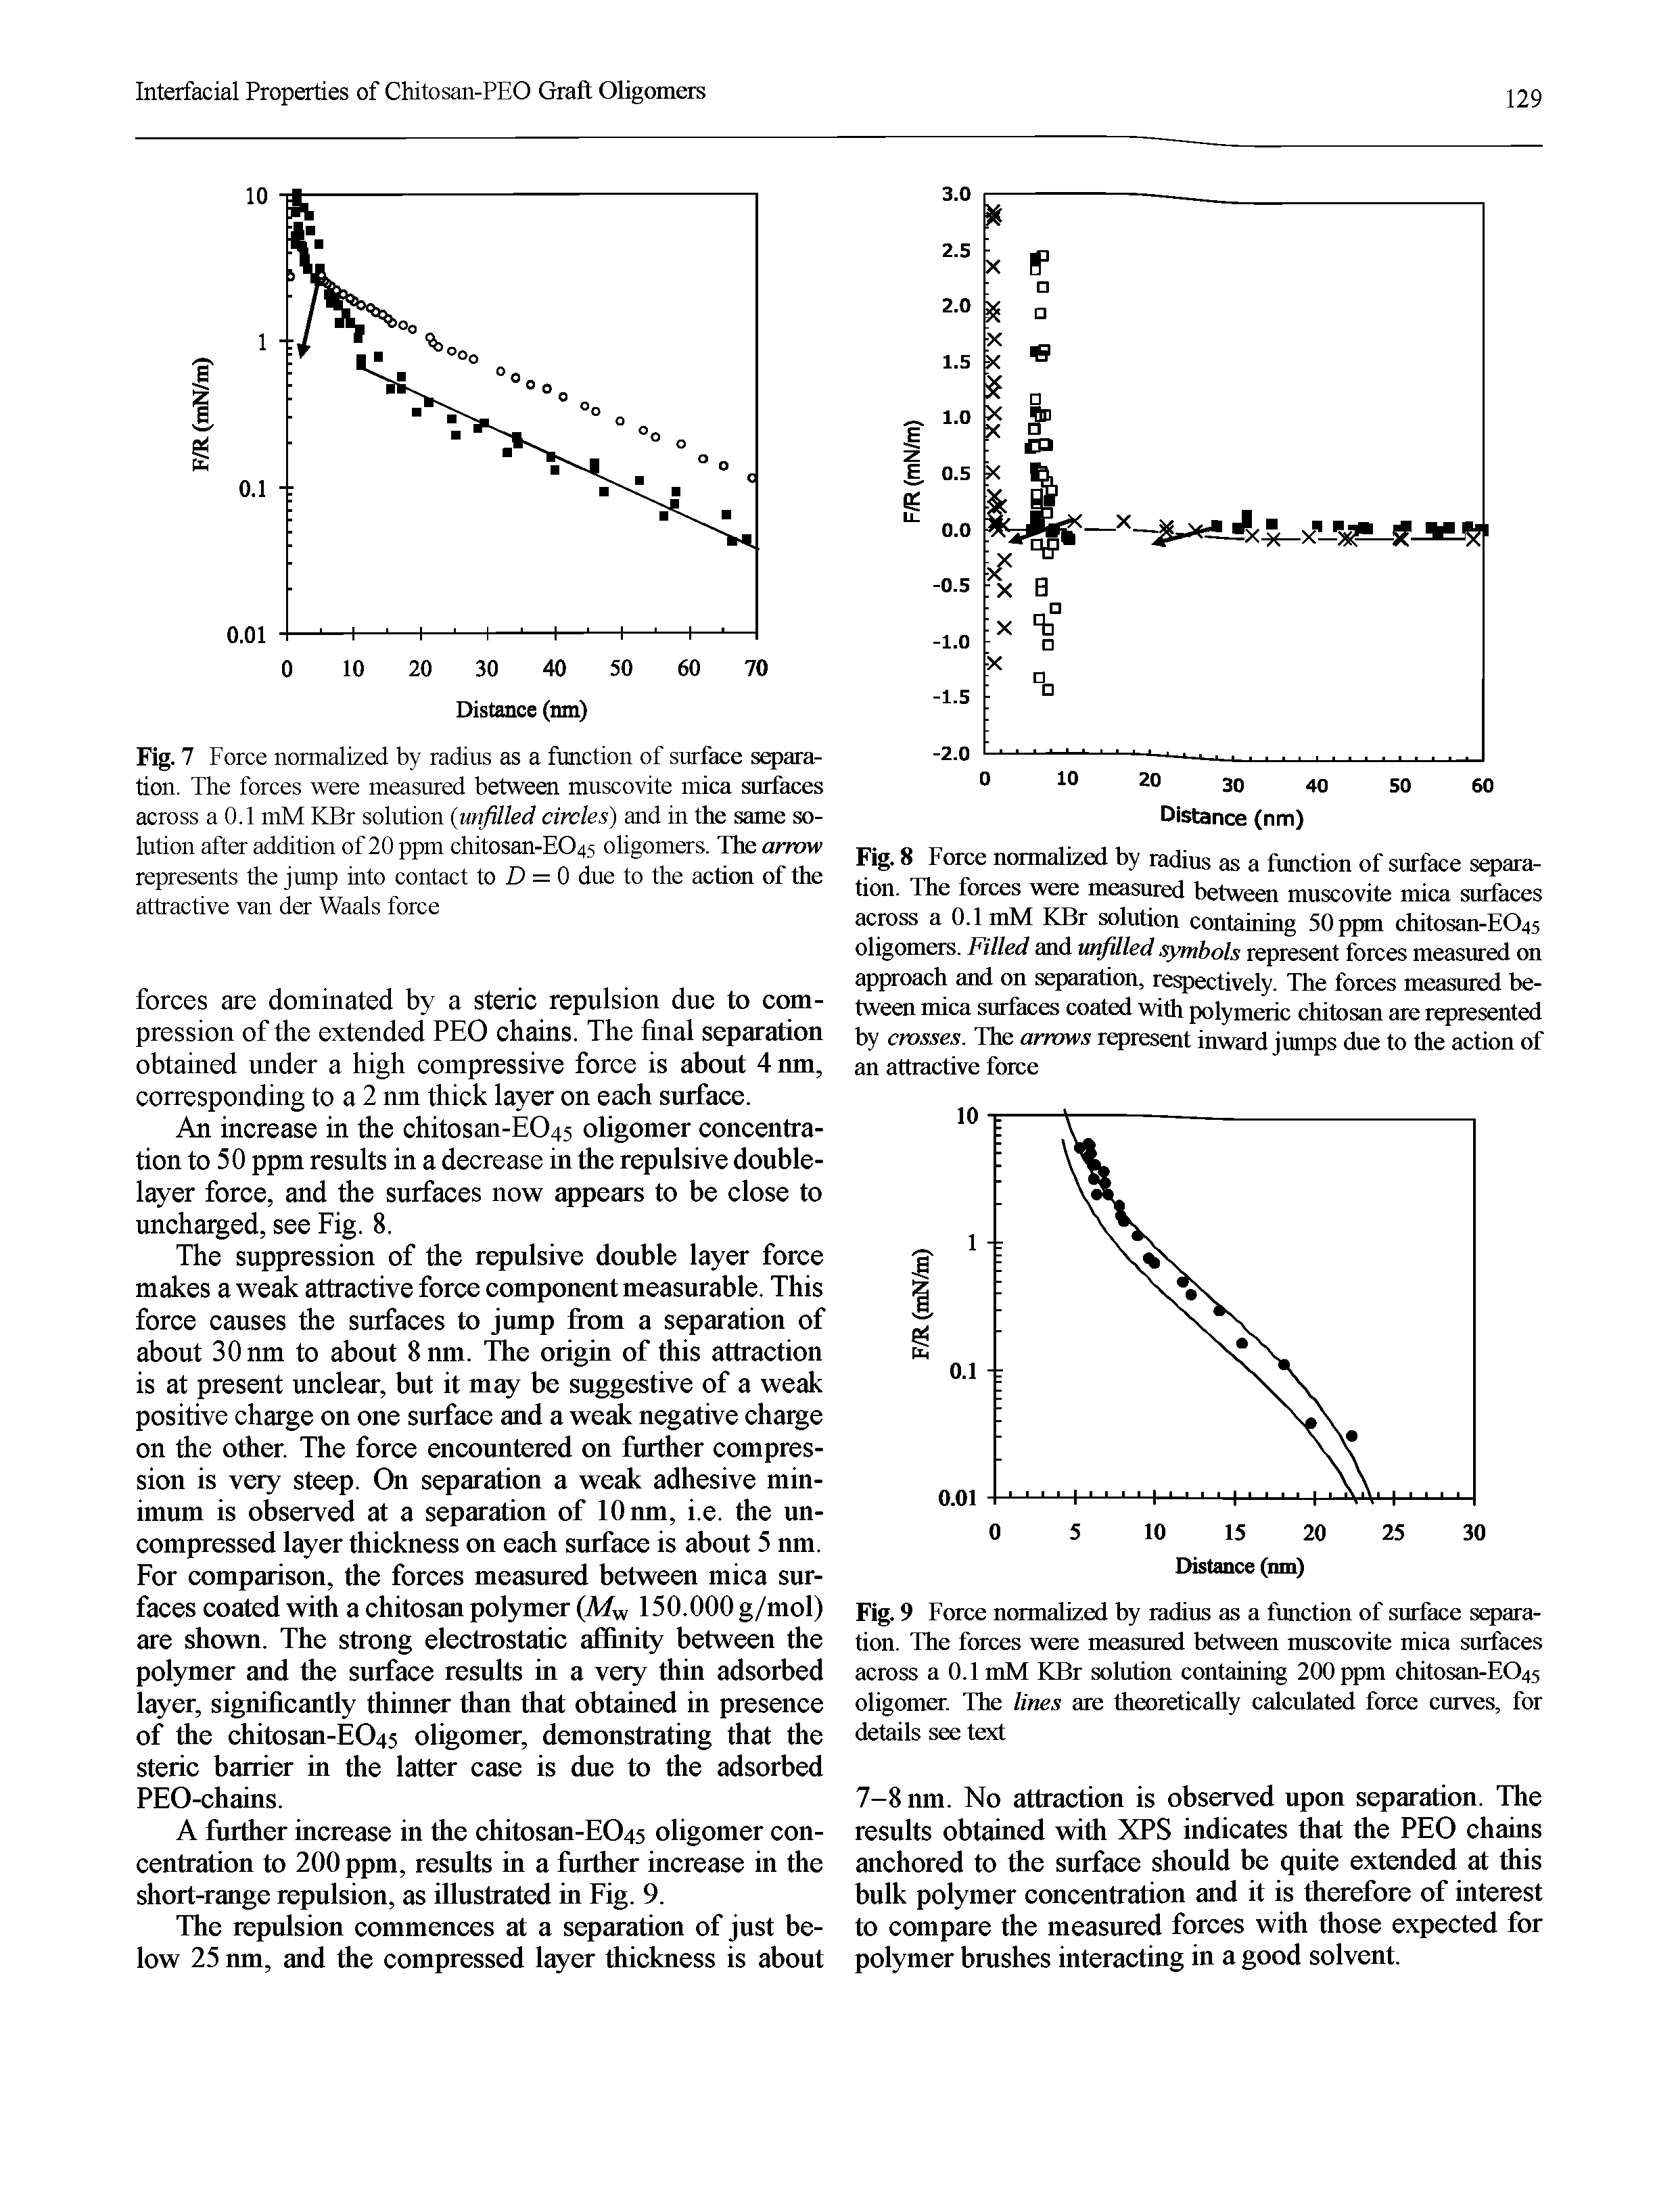 Fig. 7 Force normalized by radius as a function of surface separation. The forces were measured between muscovite mica surfaces across a 0.1 mM KBr solution (unfilled circles) and in the same solution after addition of 20 ppm chitosan-E045 oligomers. The arrow represents the jump into contact to D = 0 due to the action of the attractive van der Waals force...